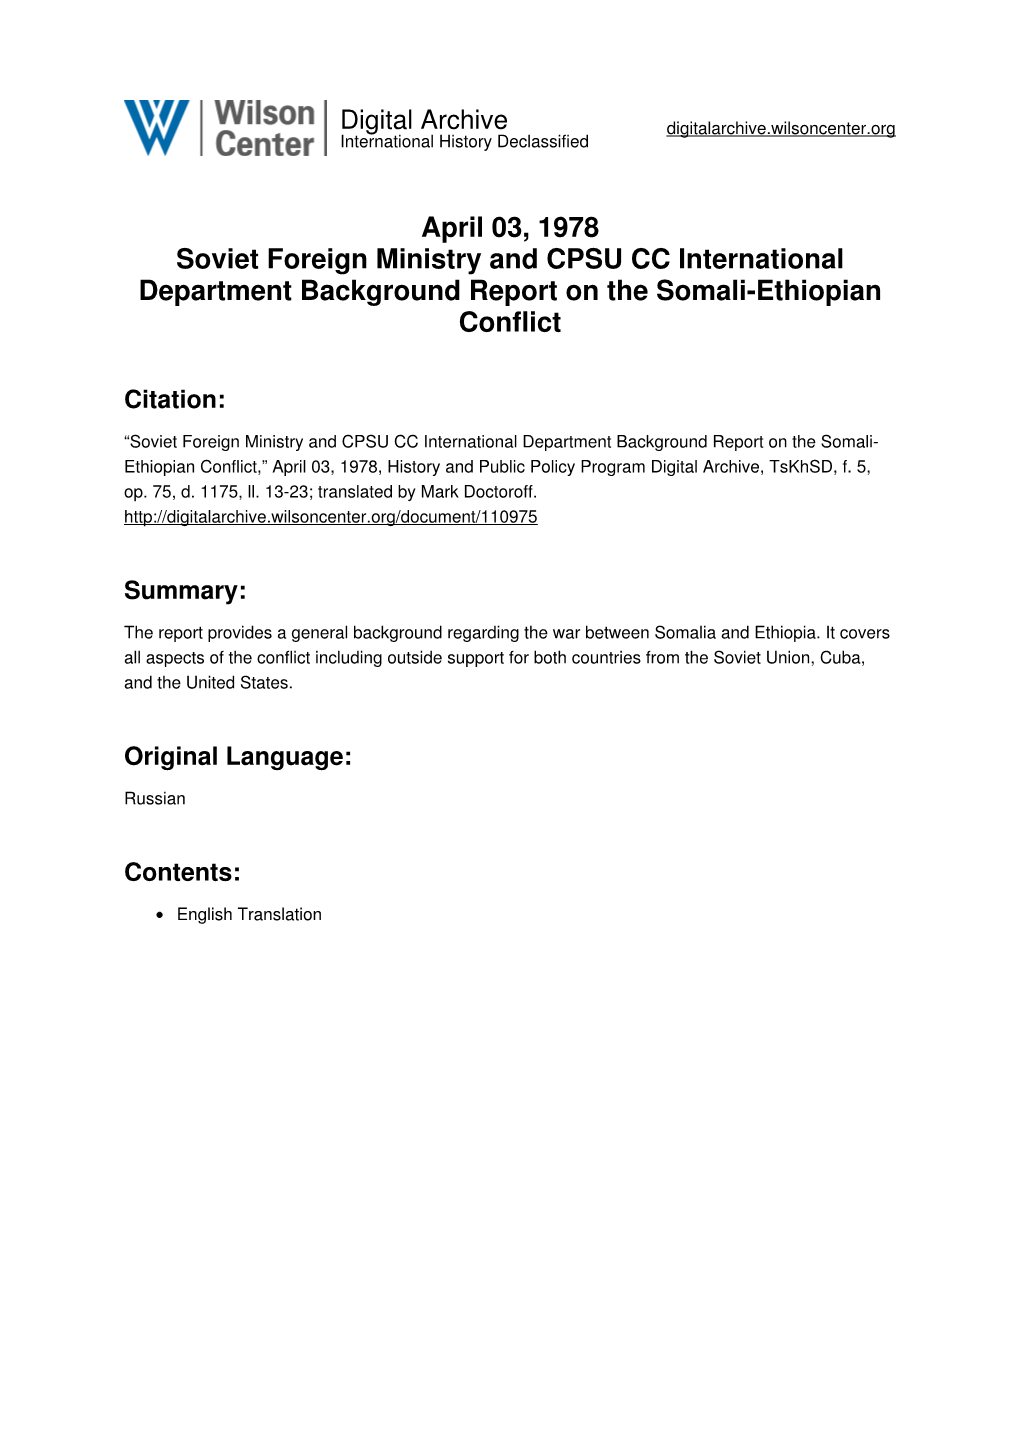 April 03, 1978 Soviet Foreign Ministry and CPSU CC International Department Background Report on the Somali-Ethiopian Conflict